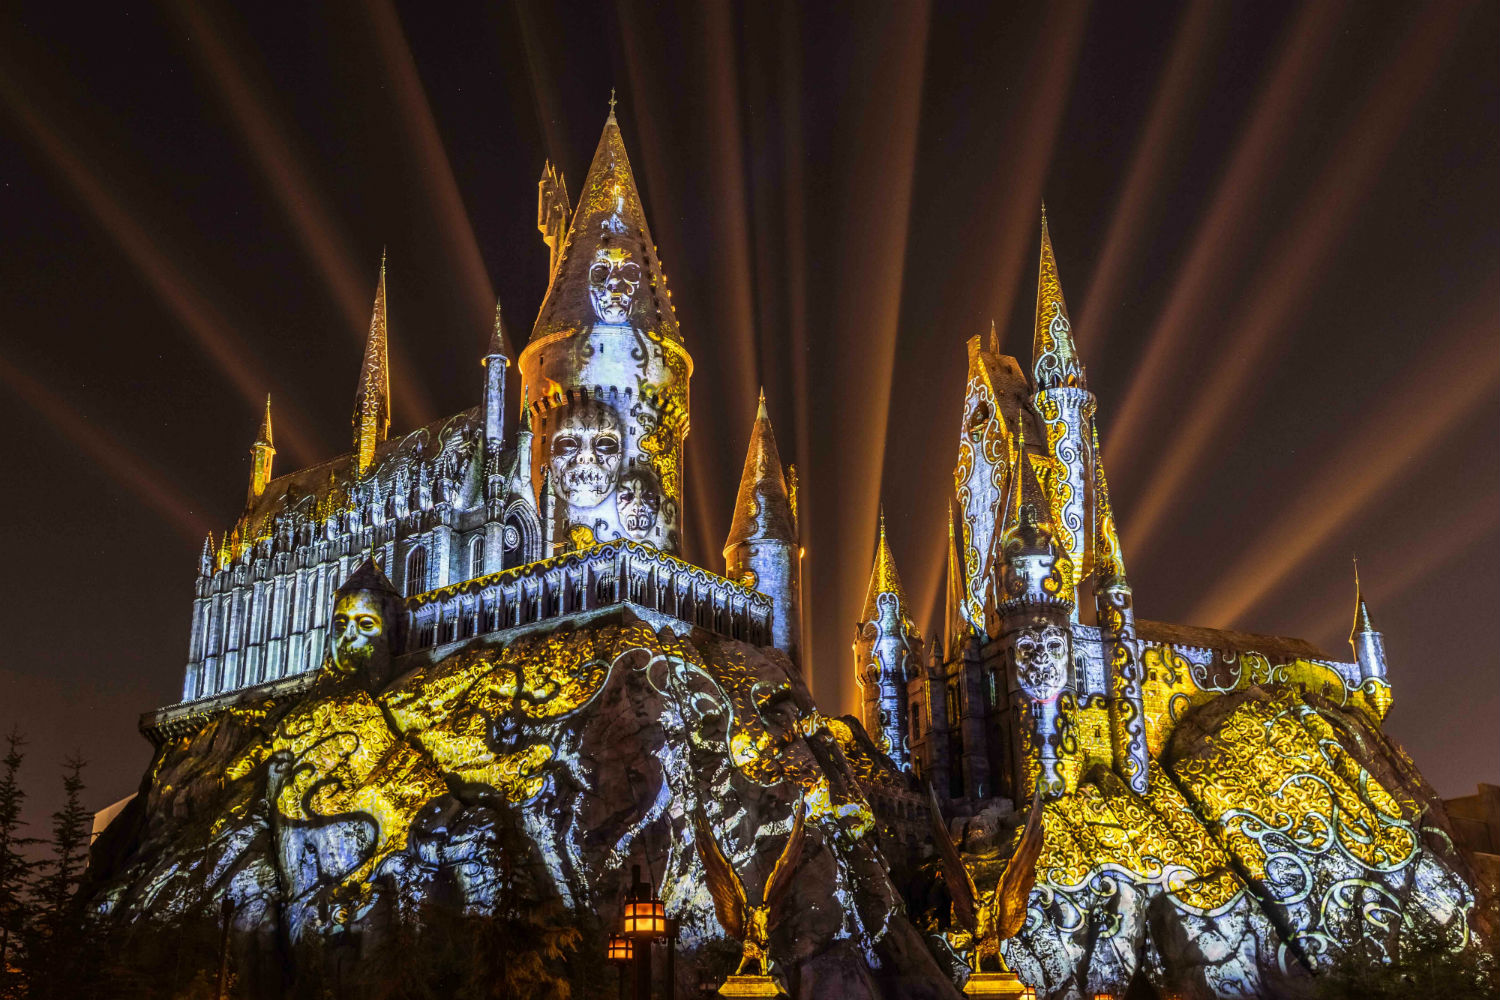 The highly anticipated projection show incorporates images and lights from the Harry Potter series.